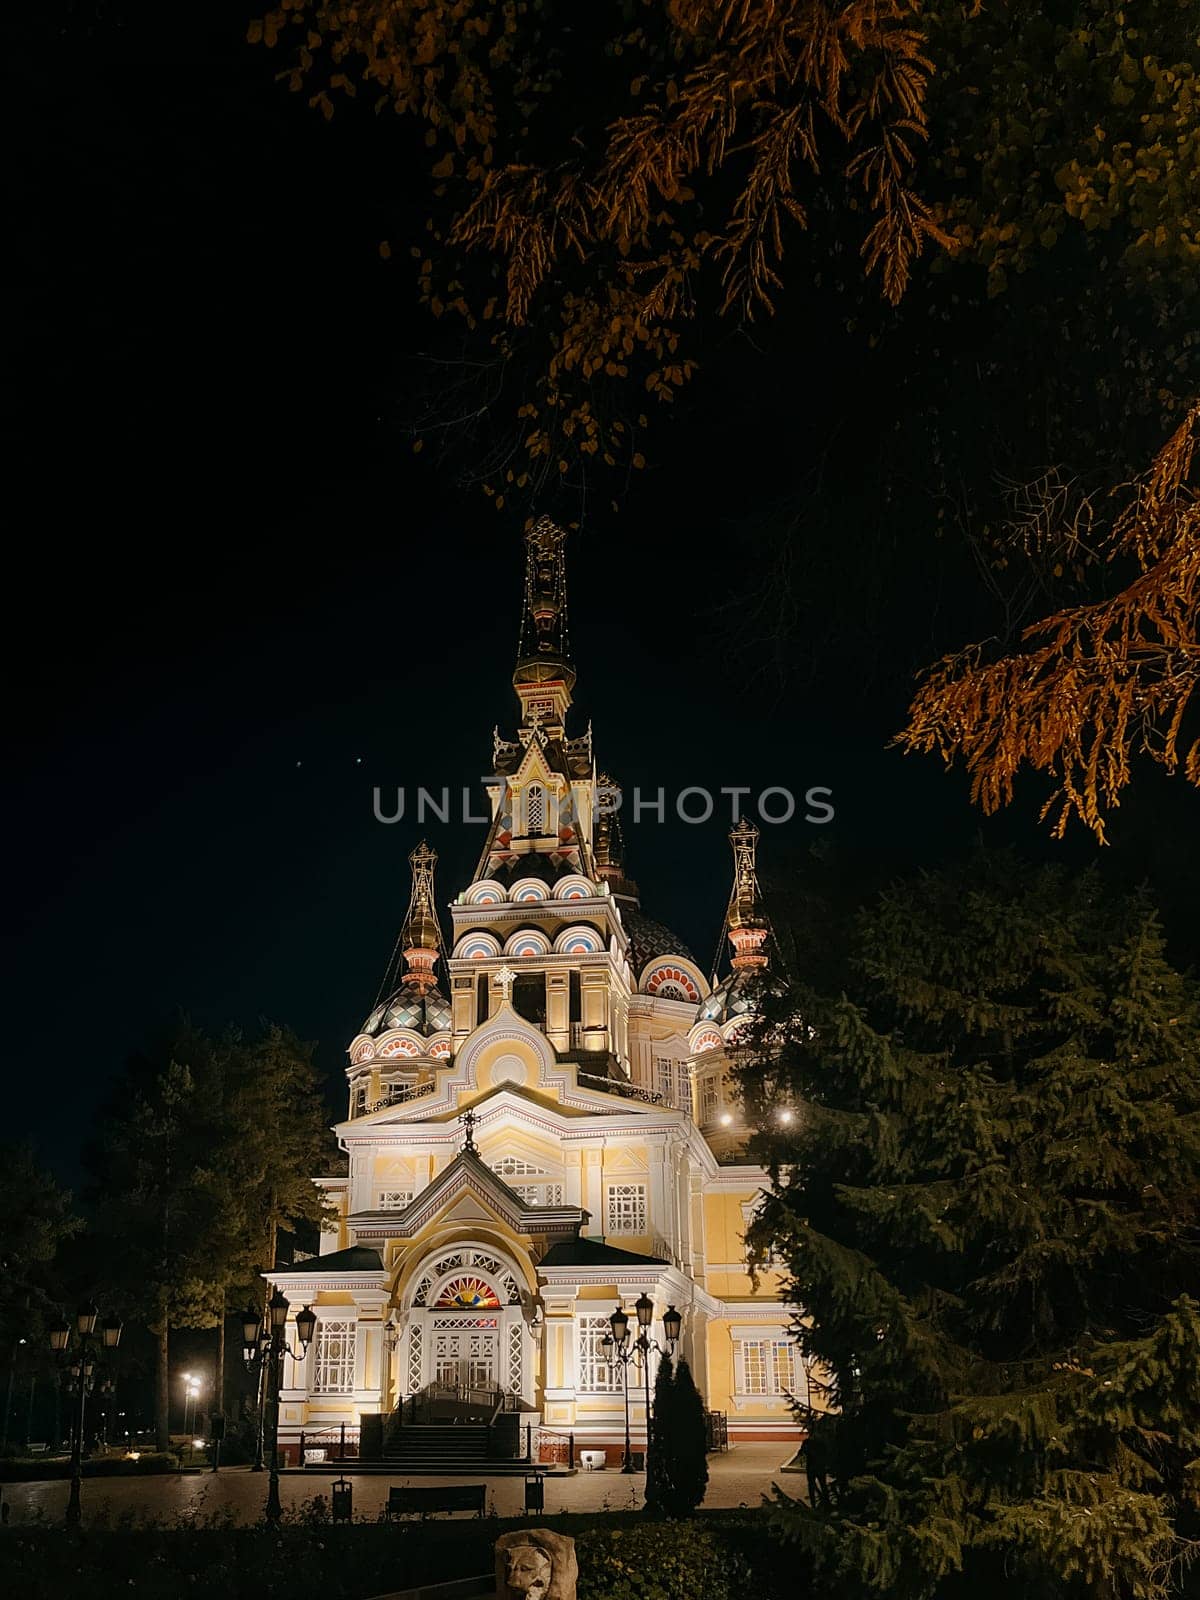 A stunning Russian Orthodox church illuminated at night, with a vibrant yellow exterior, towering steeple, surrounded by trees and park.